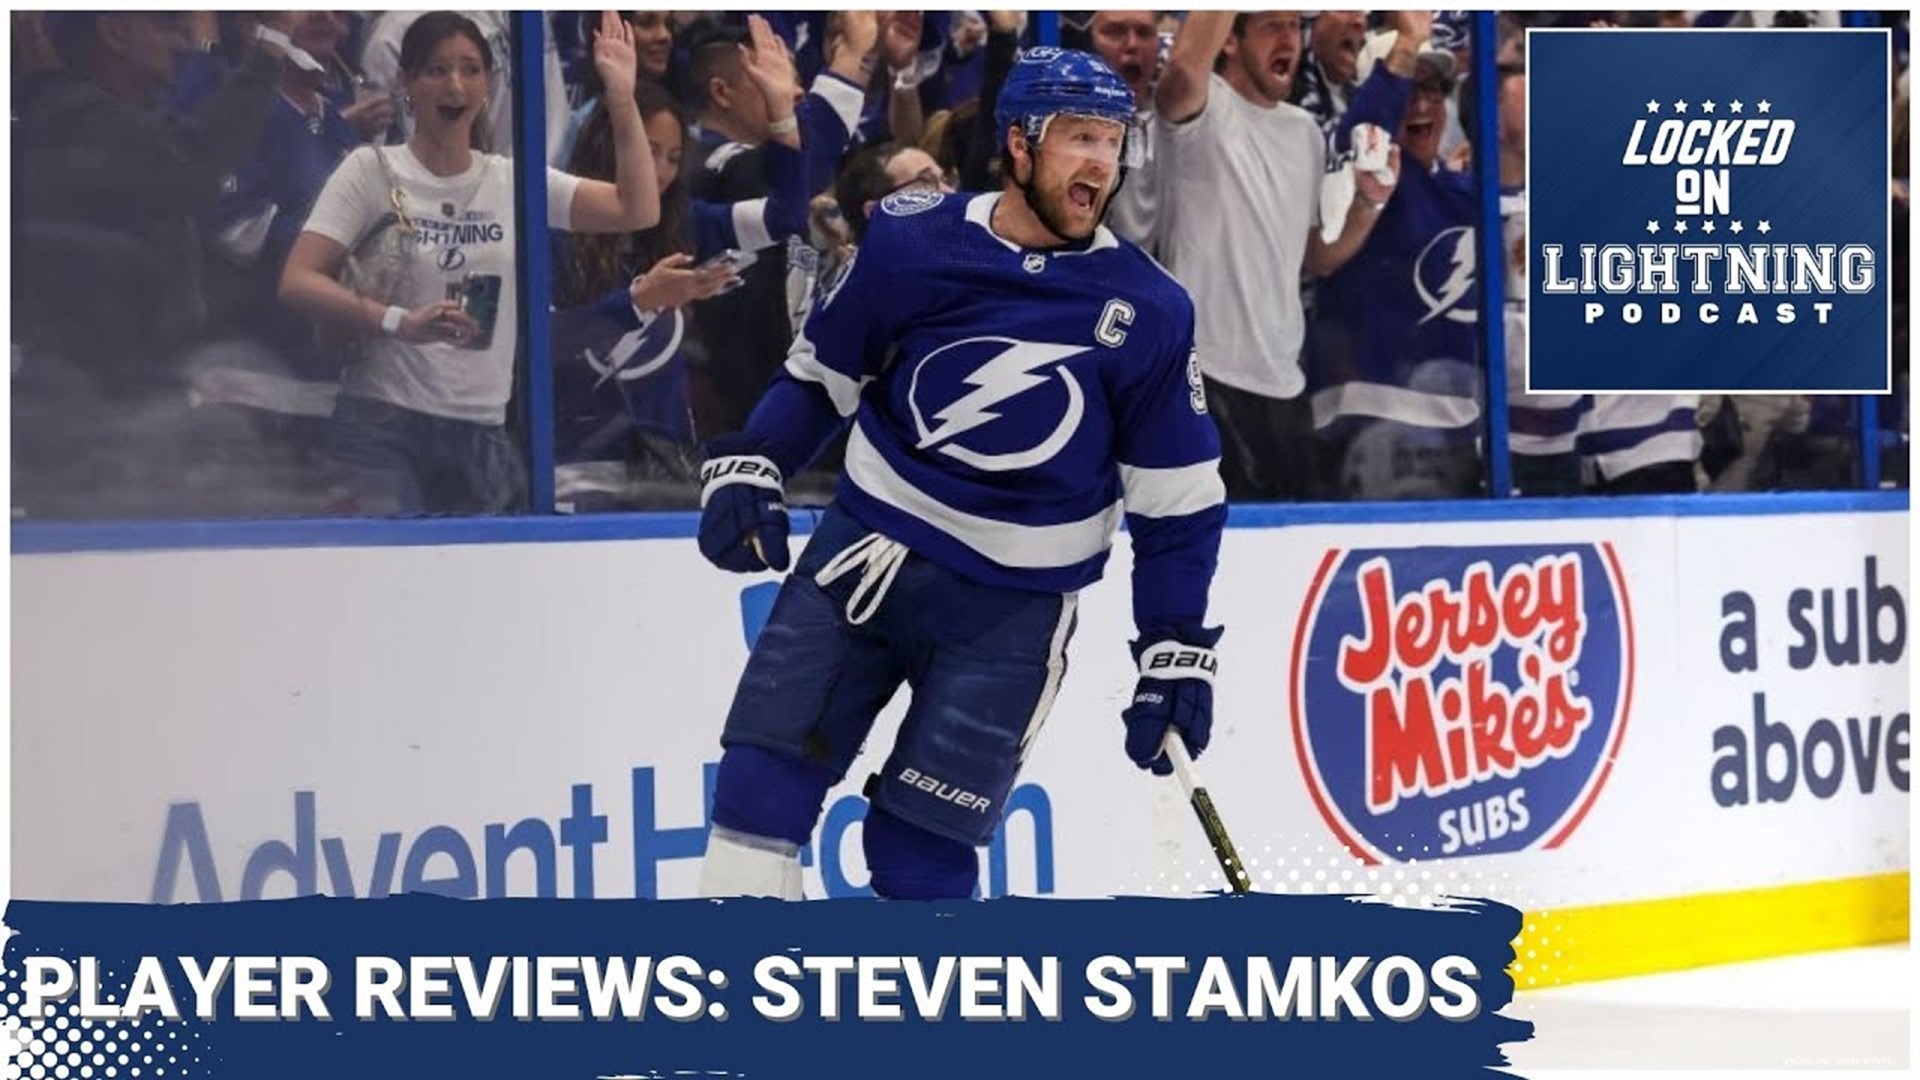 After putting up 100 points for the first time in his career, we saw the Lightning captain come back to Earth with a 34-goal season while collecting 84 points